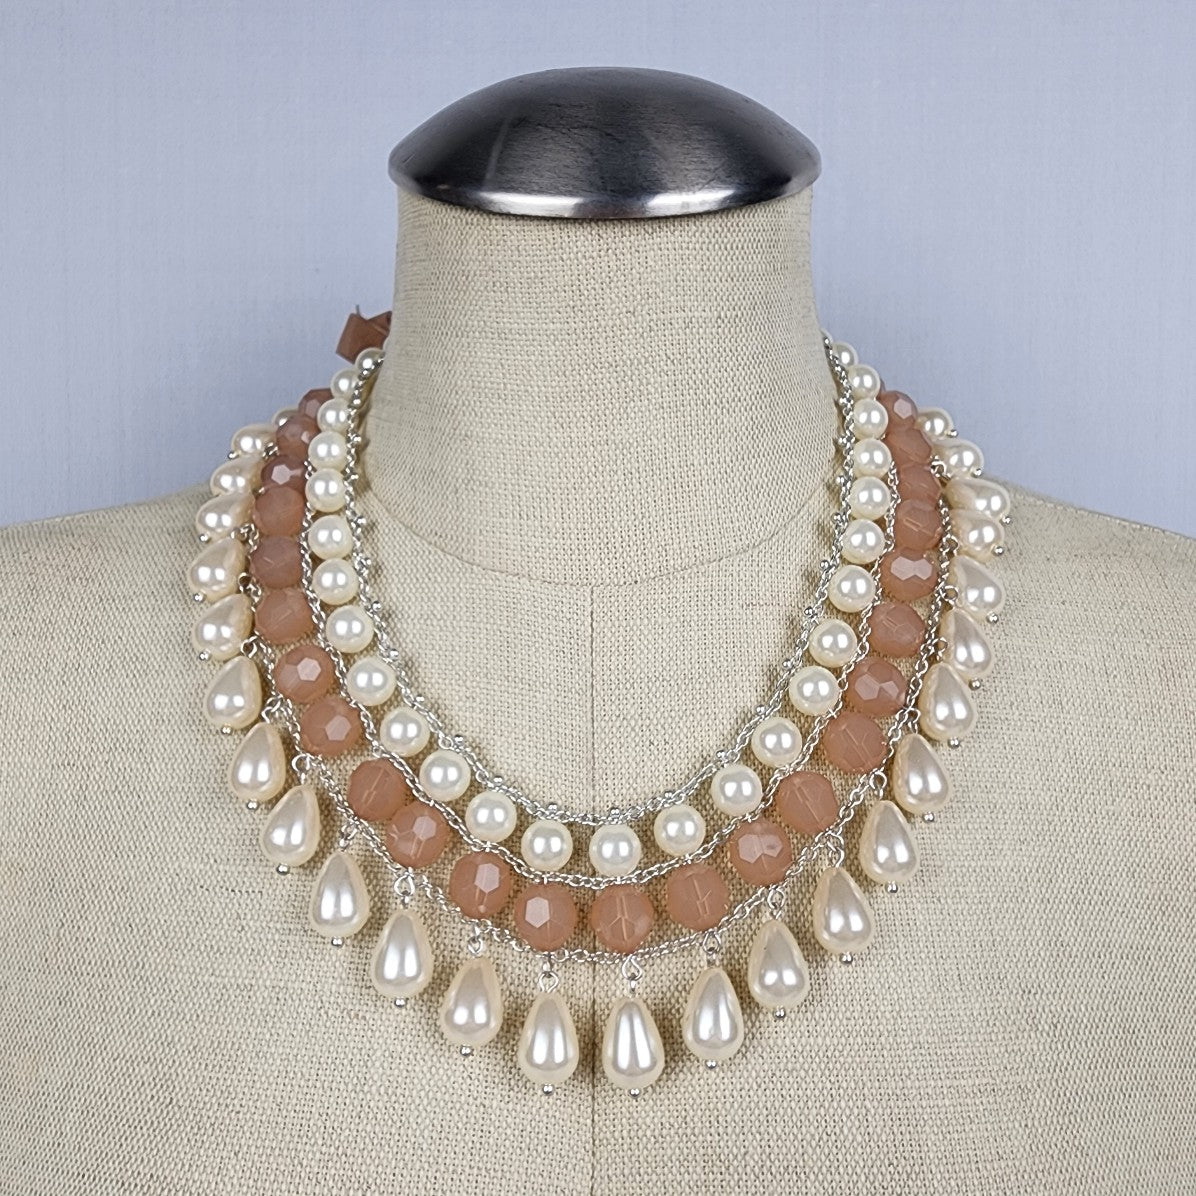 Silver Tone White & Brown Beaded Teardrop Faux Pearl Statement Necklace